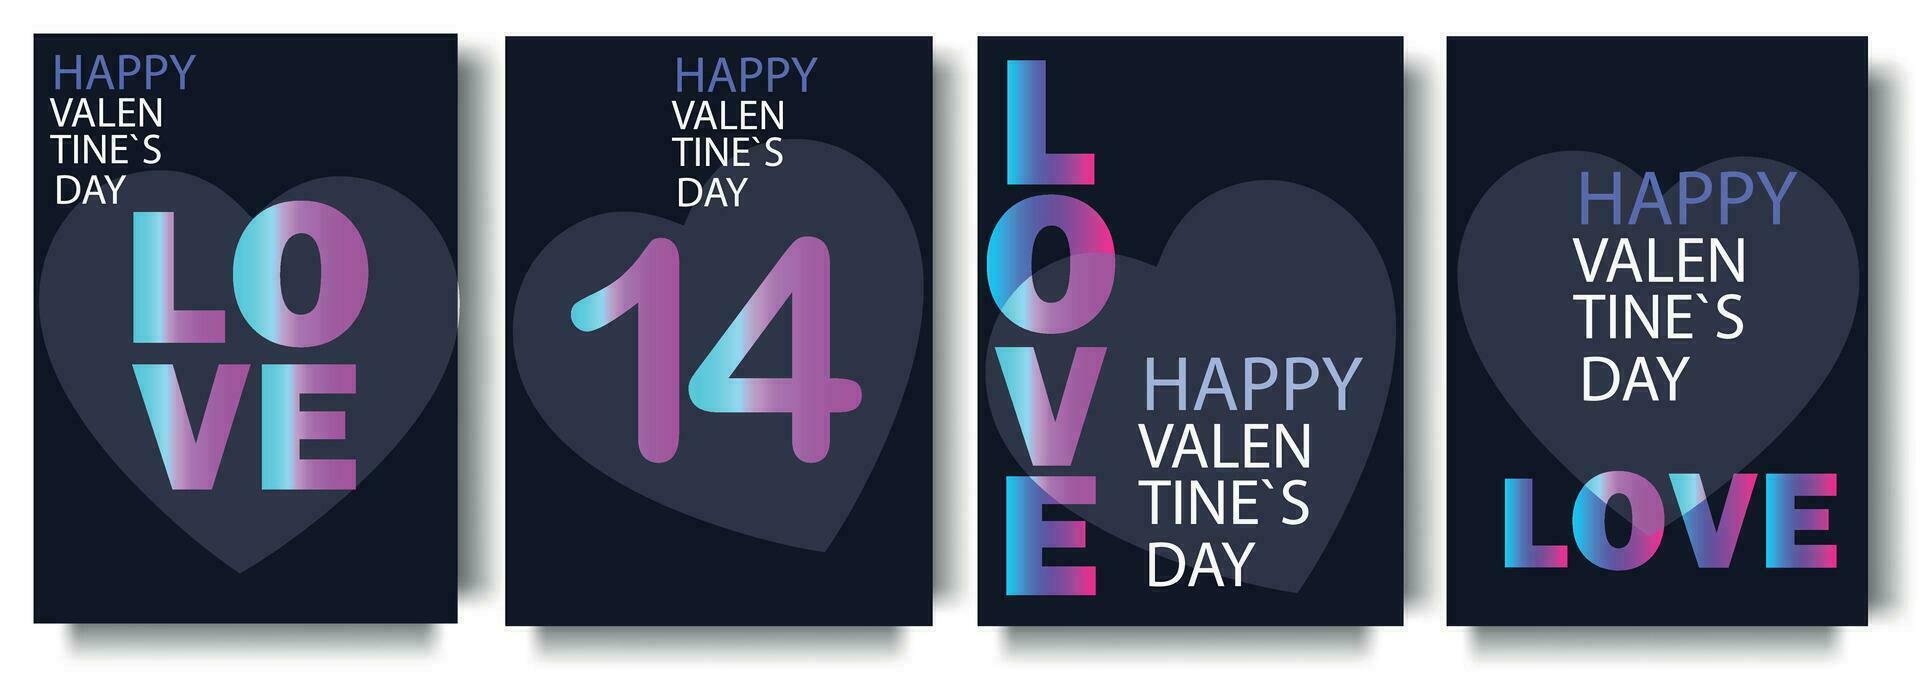 Happy Valentines Day cards set. Modern art design with interesting font and in gradient. Templates for celebration, ads, branding, banner, cover, label, poster, sales vector